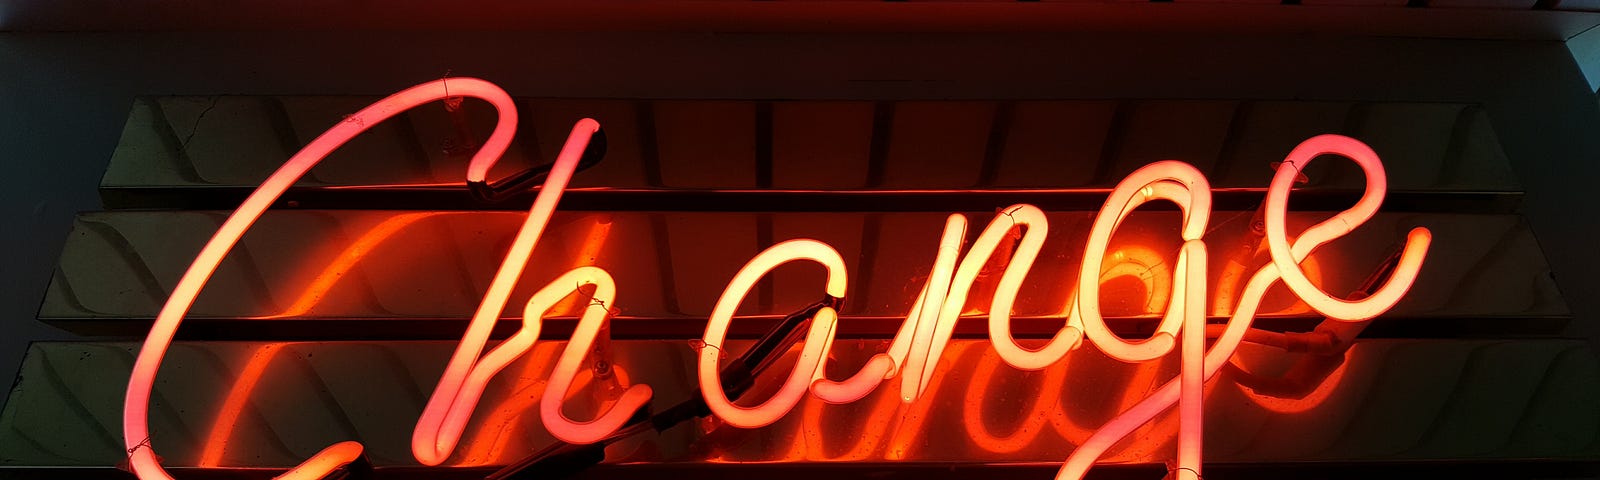 Neon sign spelling out: “Change”